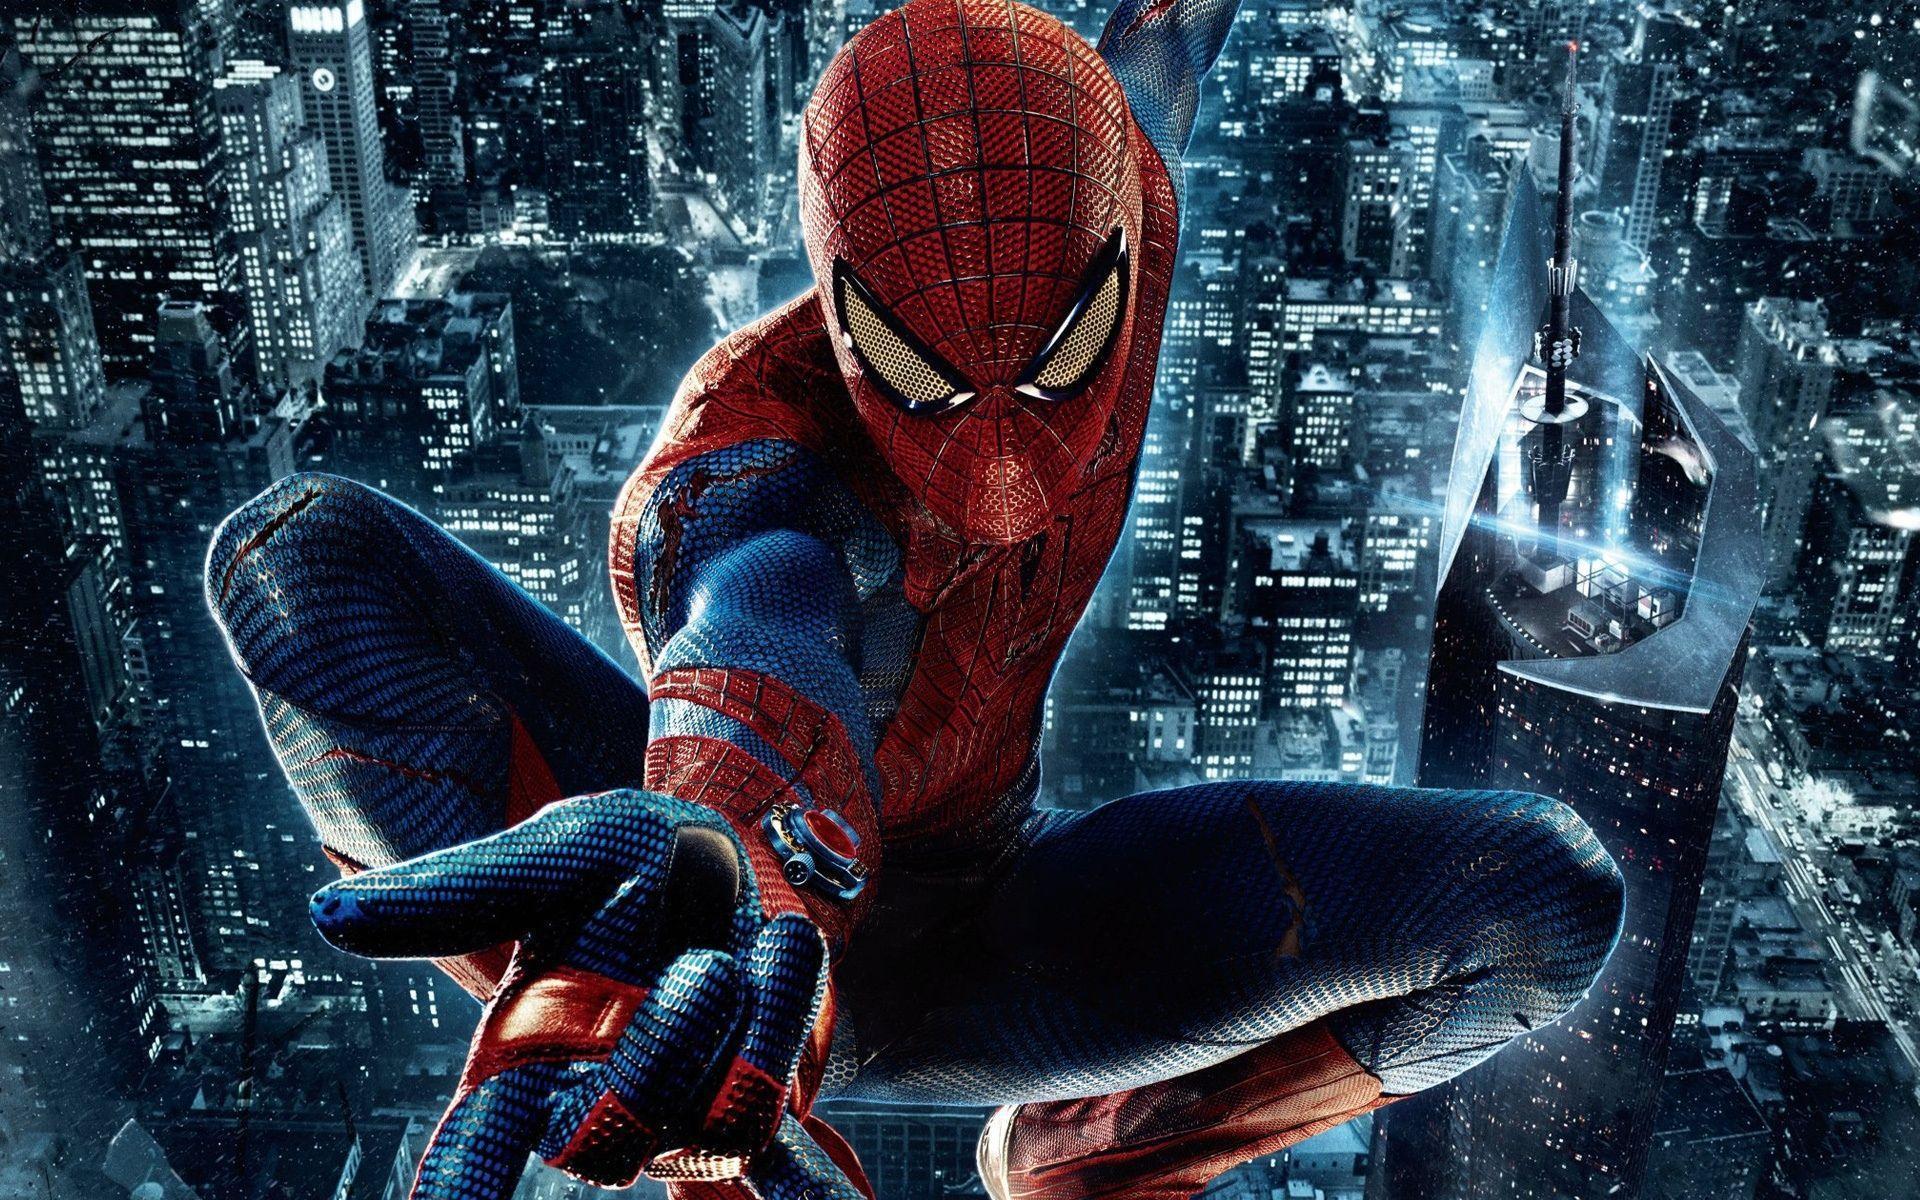 Come finisce The Amazing Spider-Man